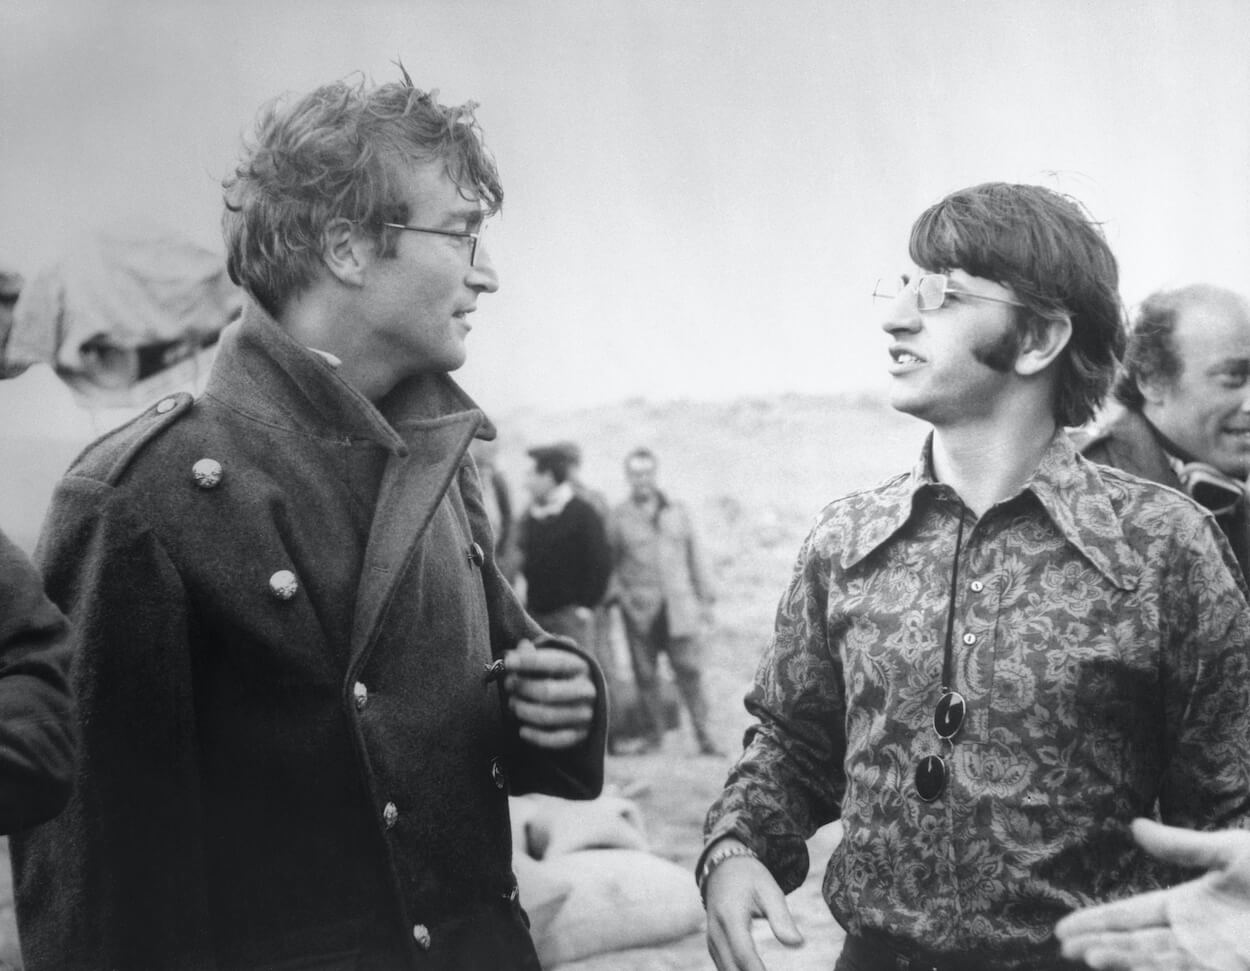 Beatles John Lennon (left) and Ringo Starr on the set of the 1966 movie 'How I Won the War,' in which John starred.